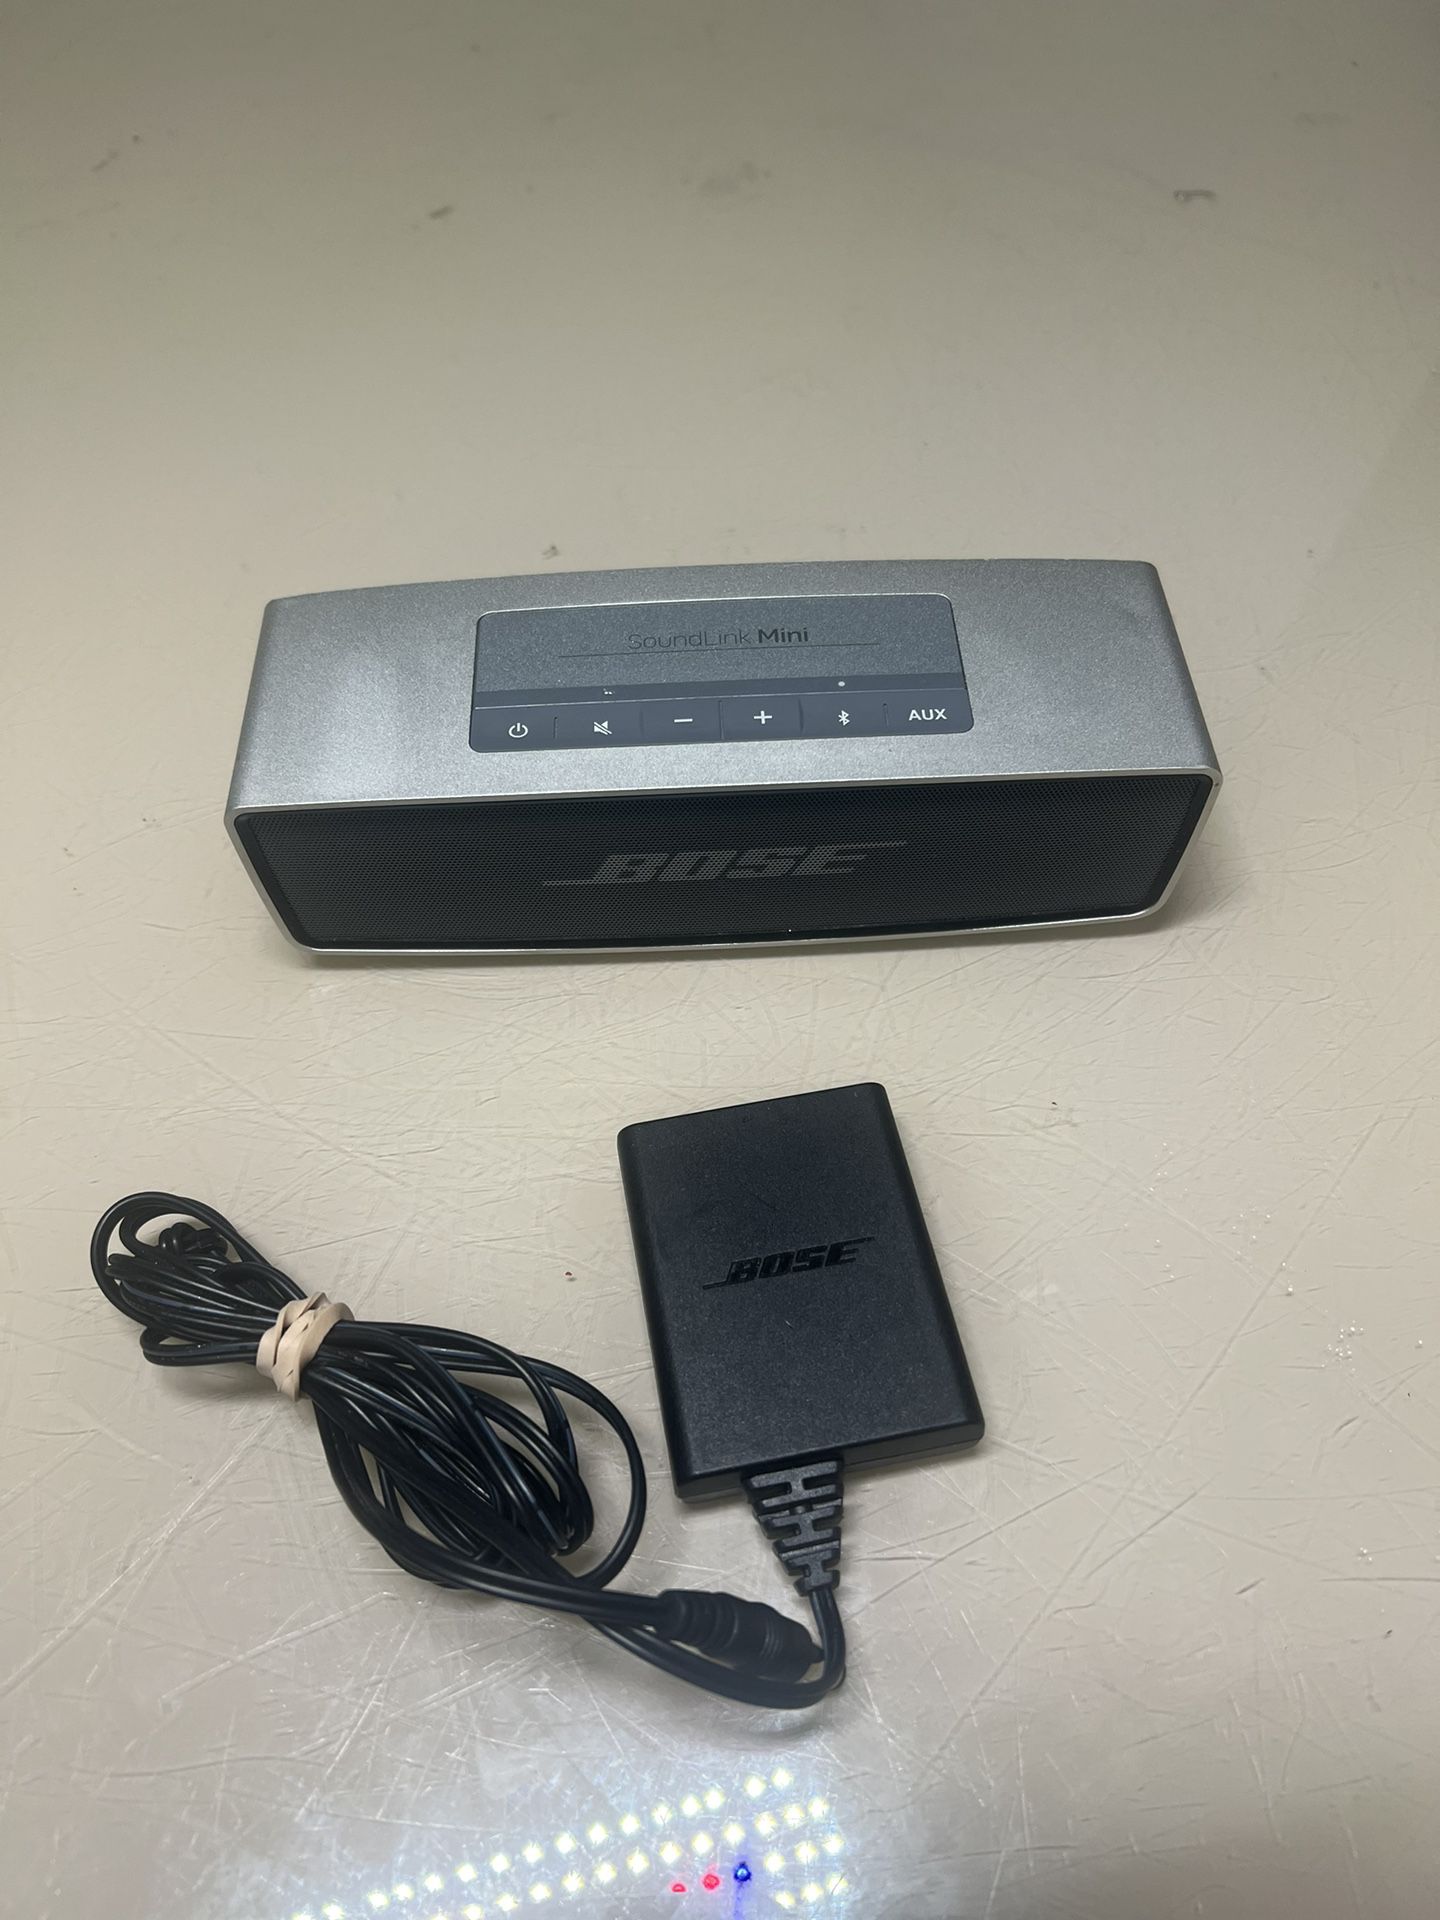 BOSE SOUNDLINK MINI 1 BLUETOOTH SPEAKER  With Power Cord clean. Used good condition with minor cosmetic blemishes. The unit is in excellent condition 